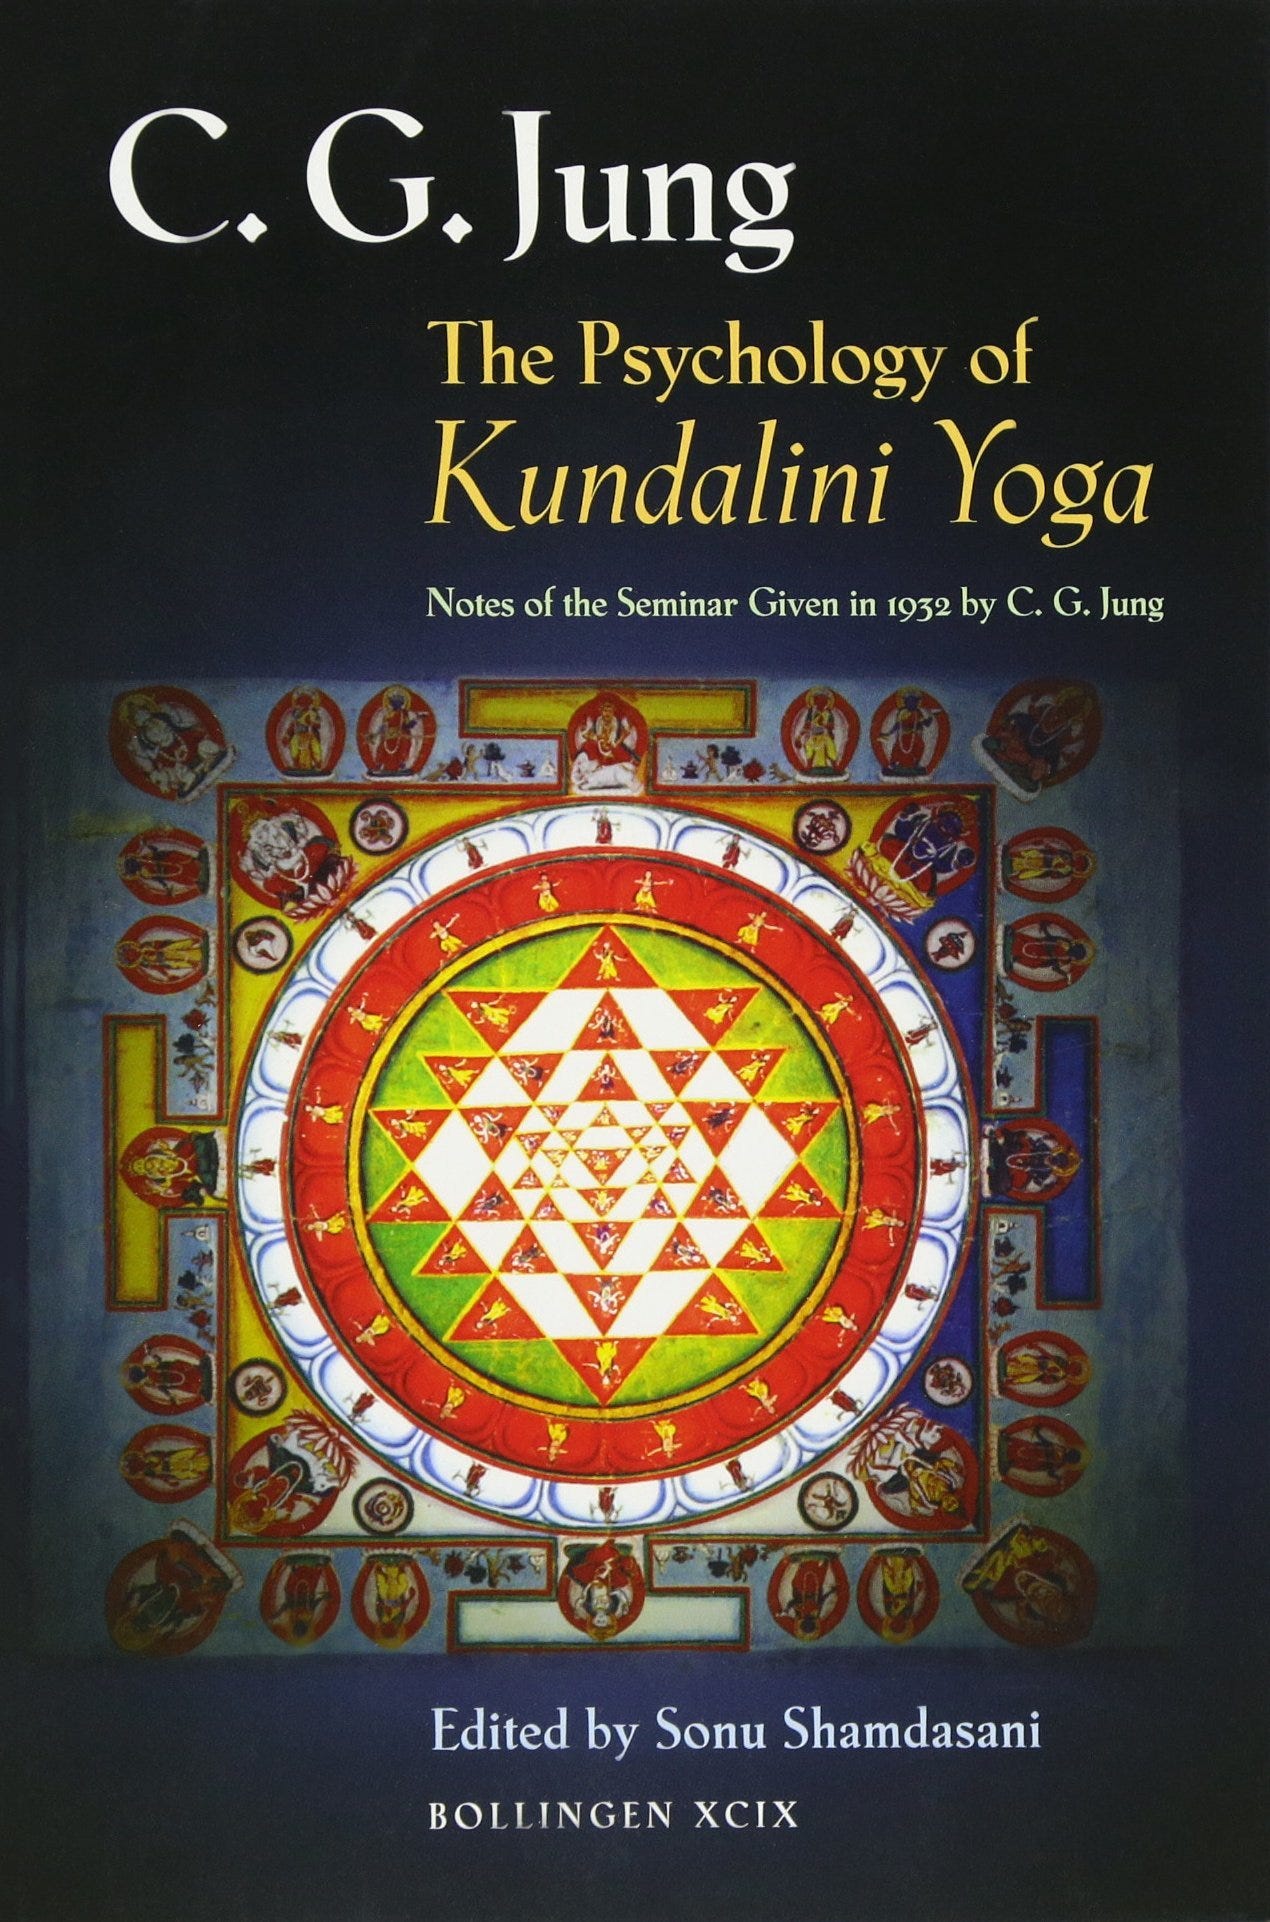 The Psychology of Kundalini Yoga: Notes of the Seminar Given in 1932 by  C.G. Jung | Goodreads